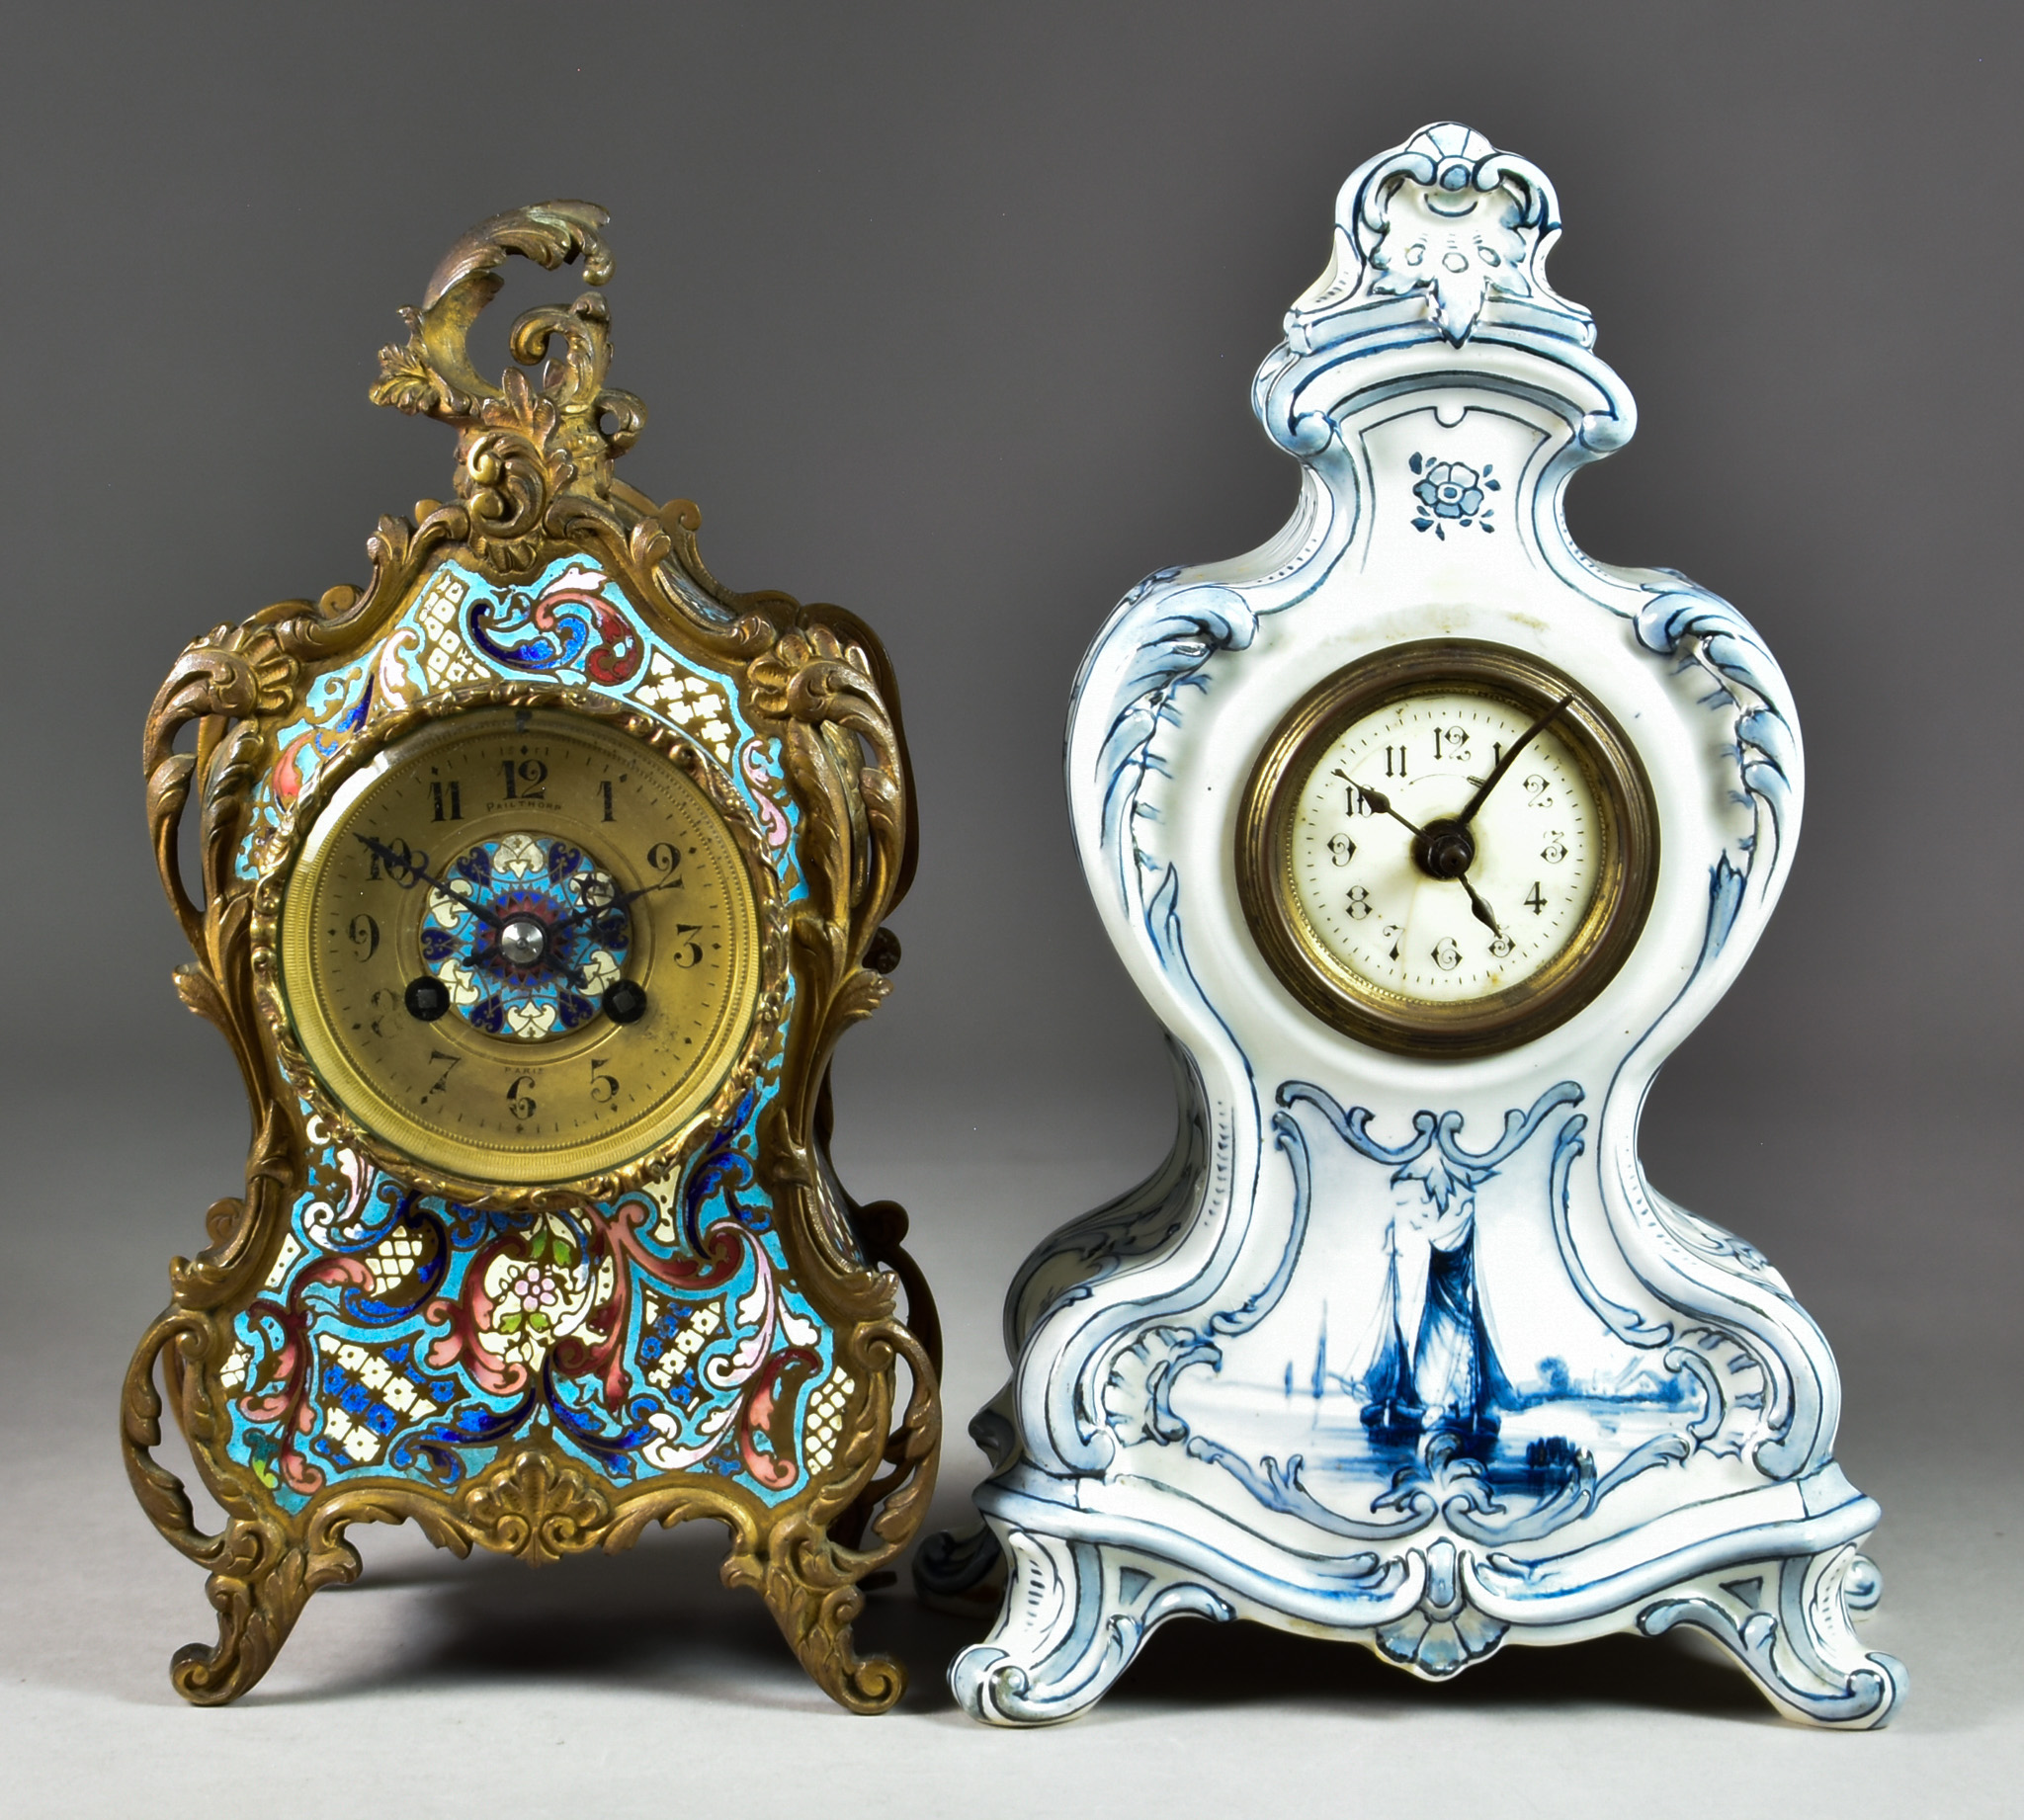 A Late 19th Century French Gilt Metal Mounted and Champleve Mantel Clock and a Porcelain Clock,